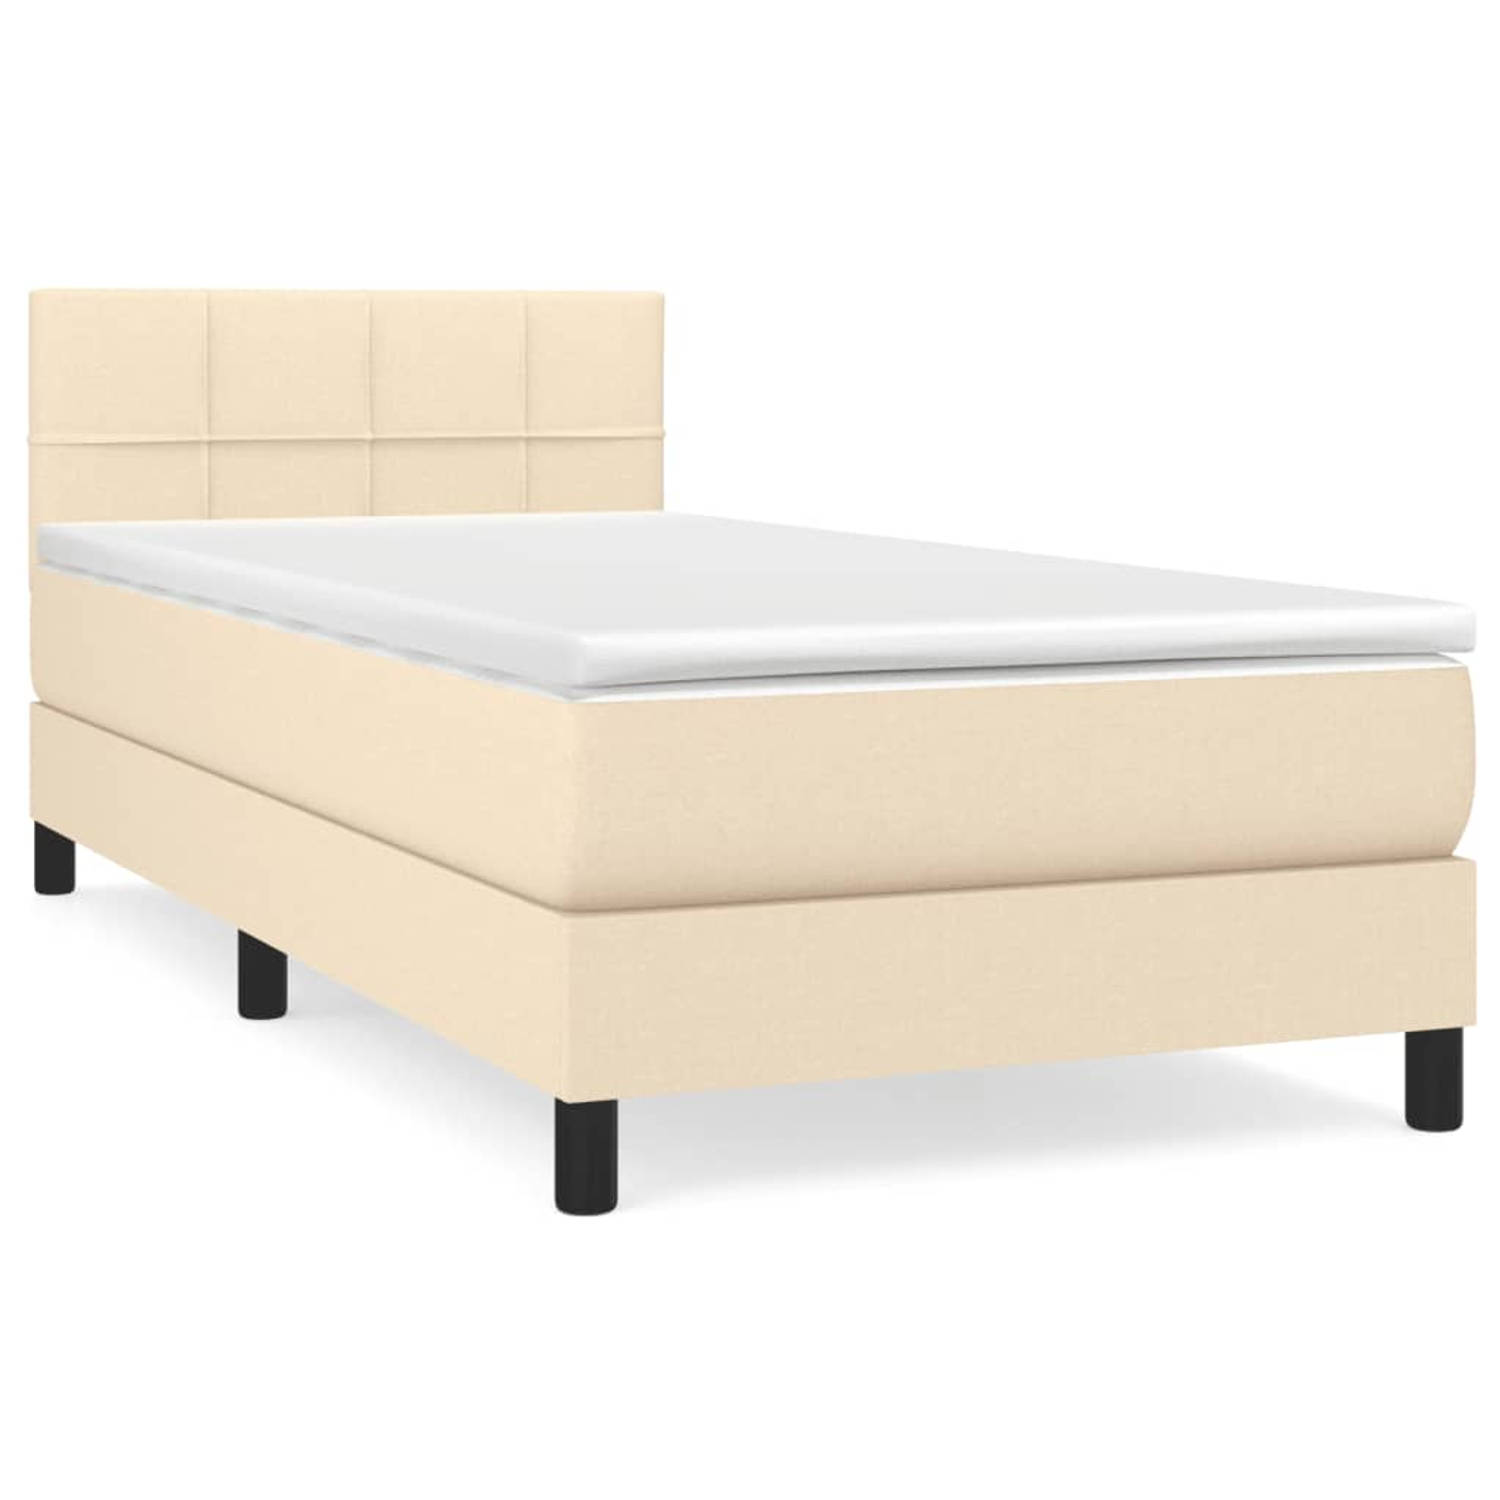 The Living Store Boxspringbed - Comfort - Bed - 203 x 90 x 78/88 cm - Crème